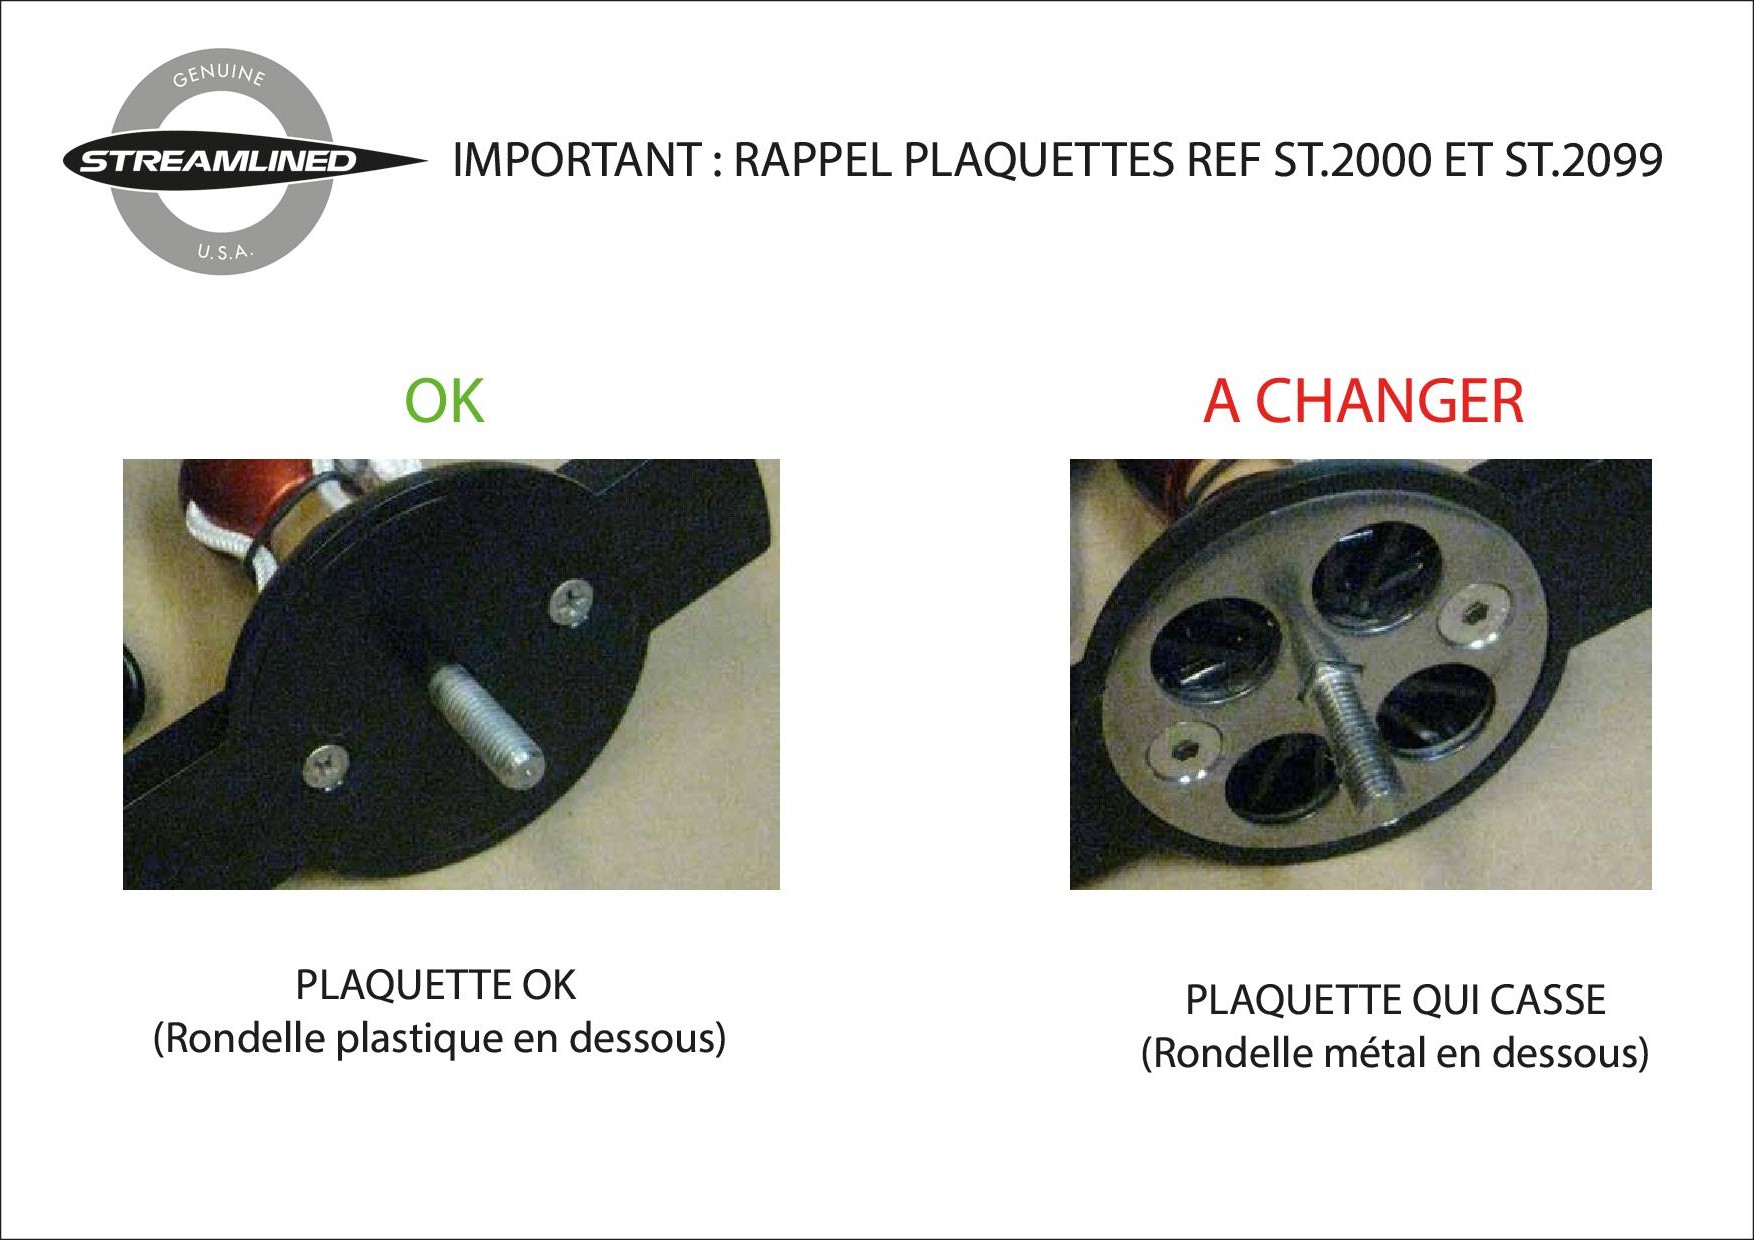 RAPPEL : Plaquettes Streamlined